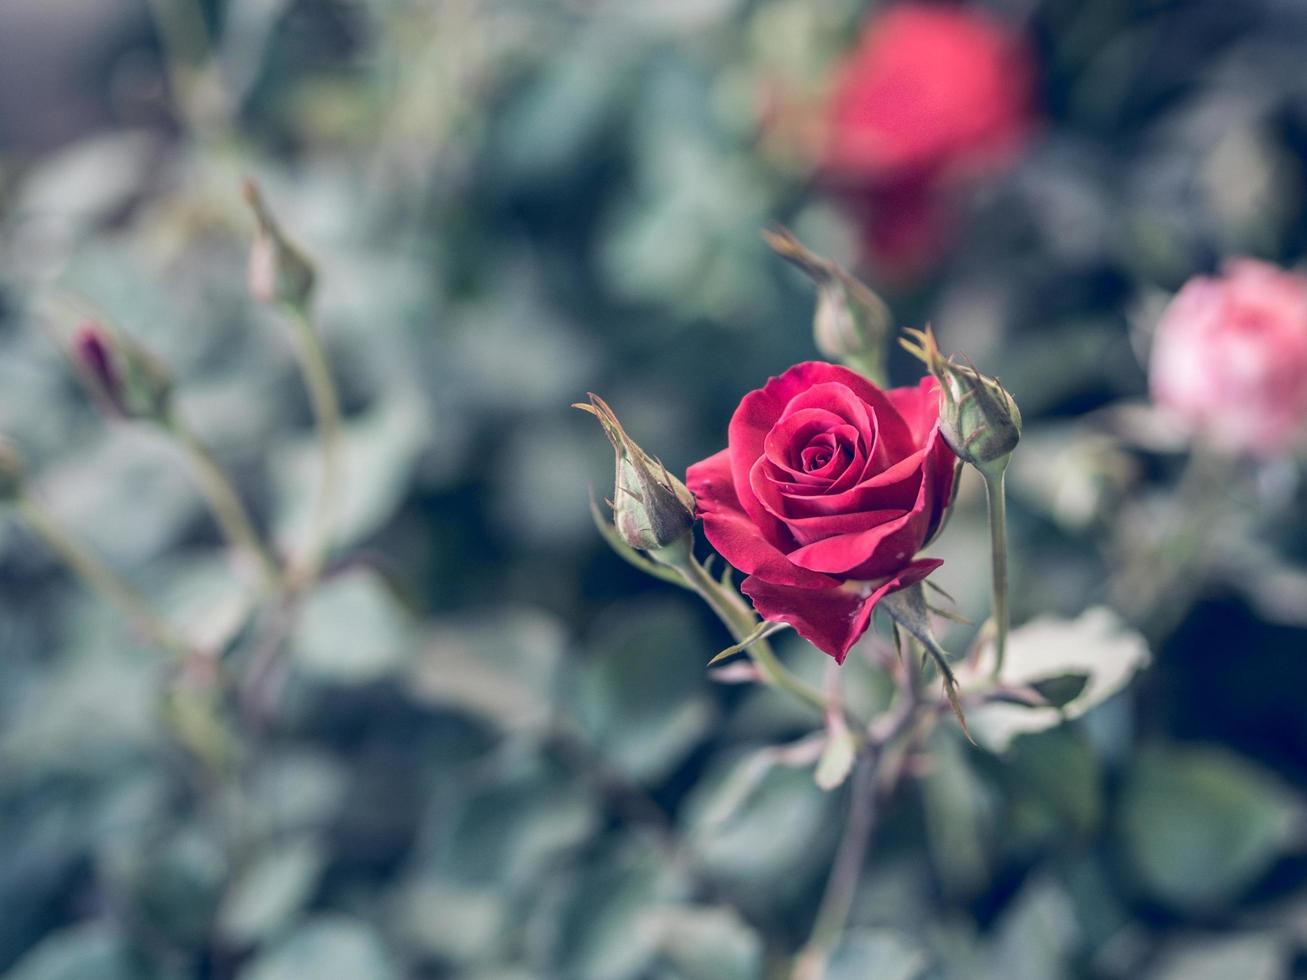 Red rose, Vintage style image photo